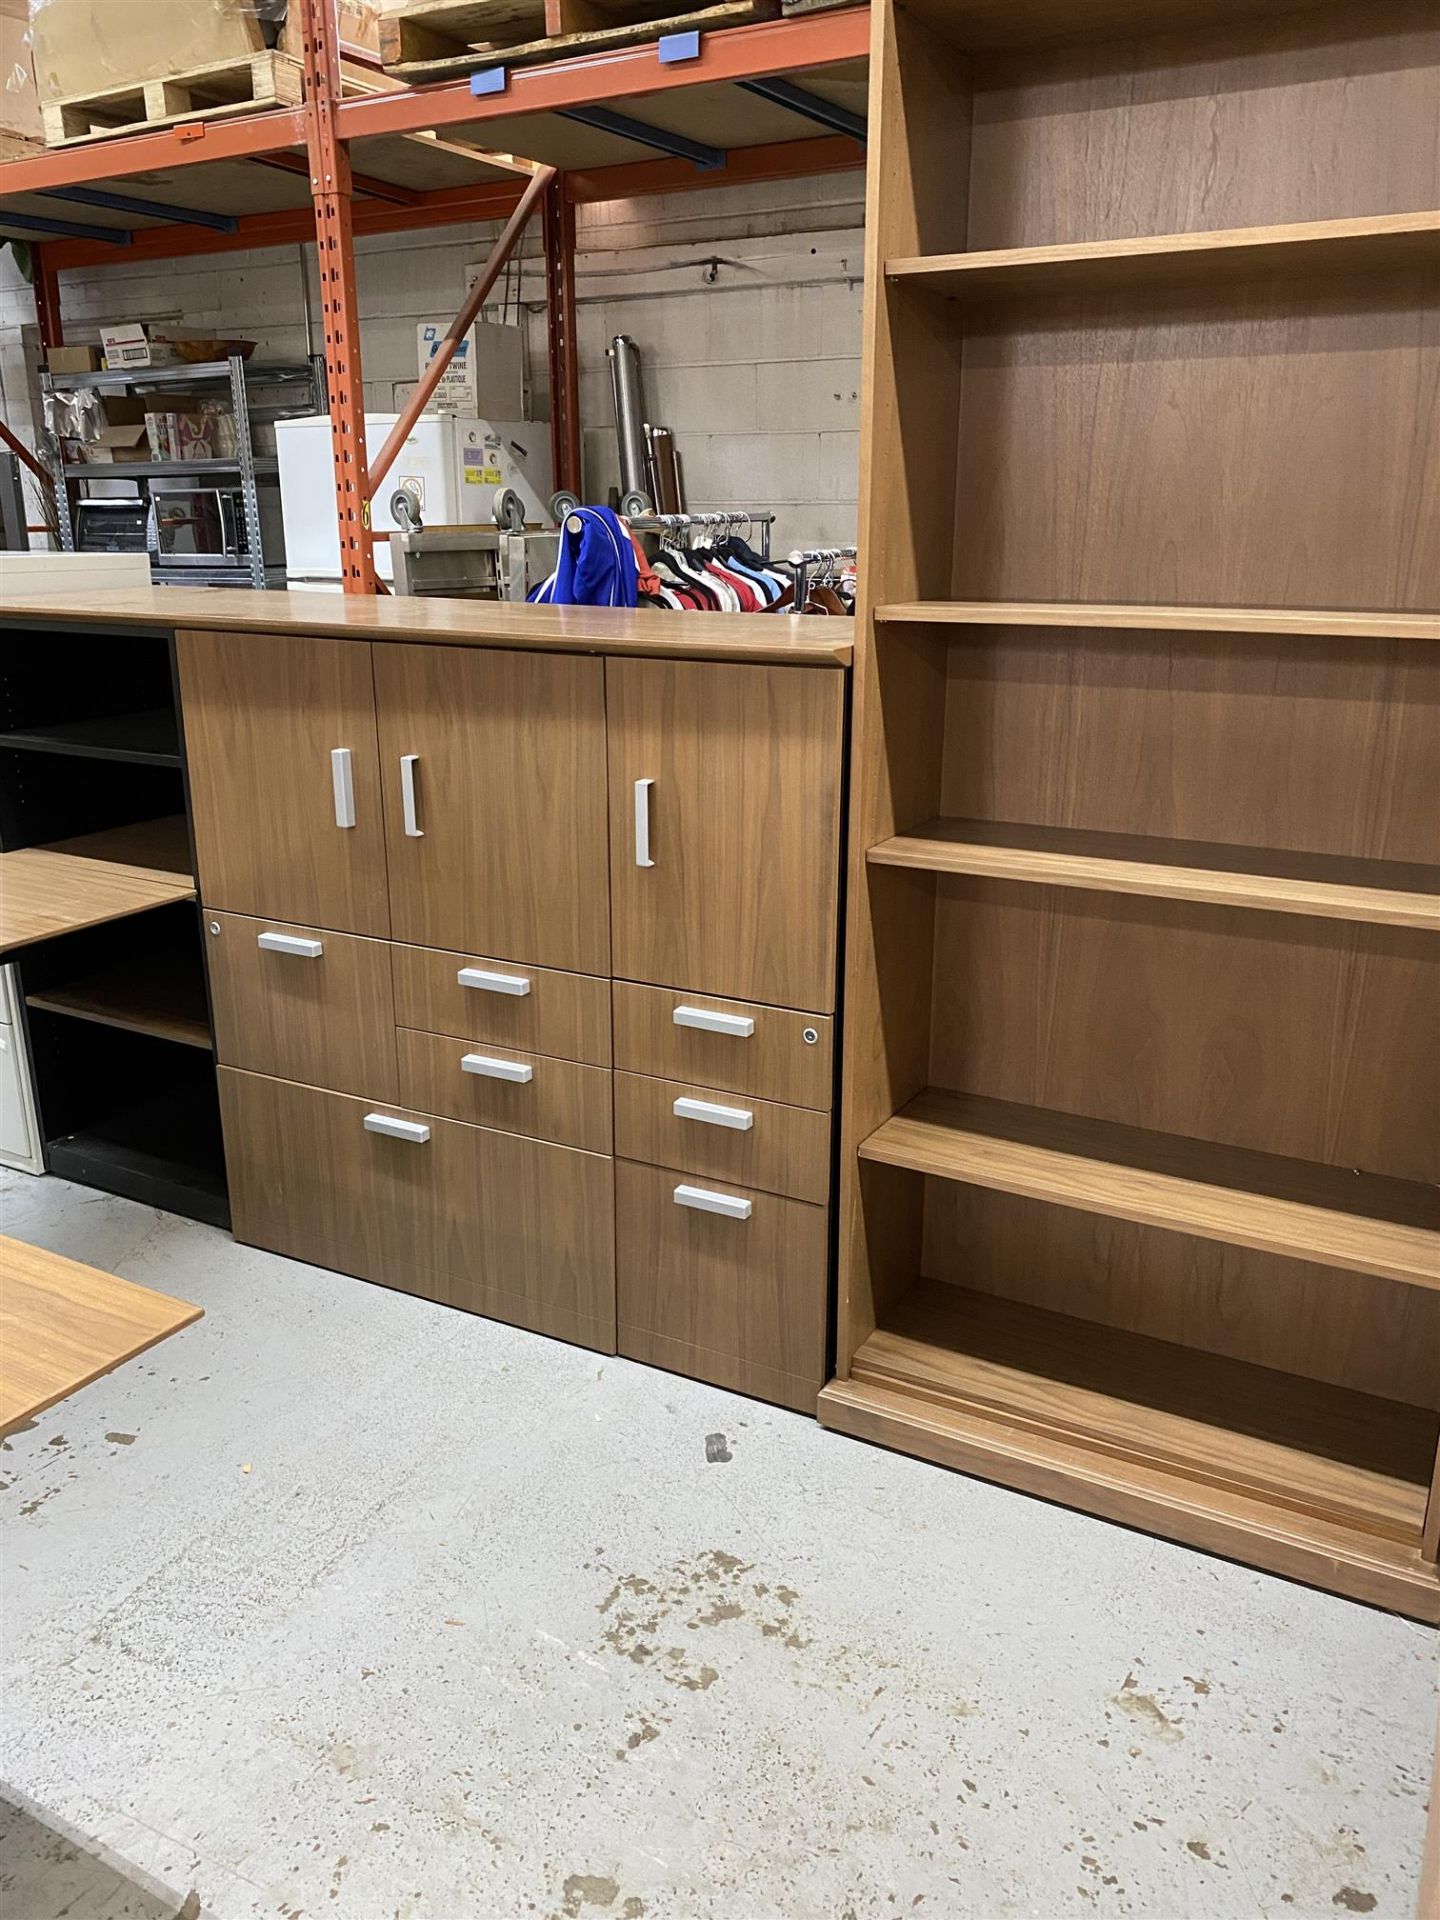 COMPLETE OFFICE SET WITH L-SHAPED DESK, DRAWERS, SHELVES AND STORAGE CUPBOARDS - Image 2 of 2